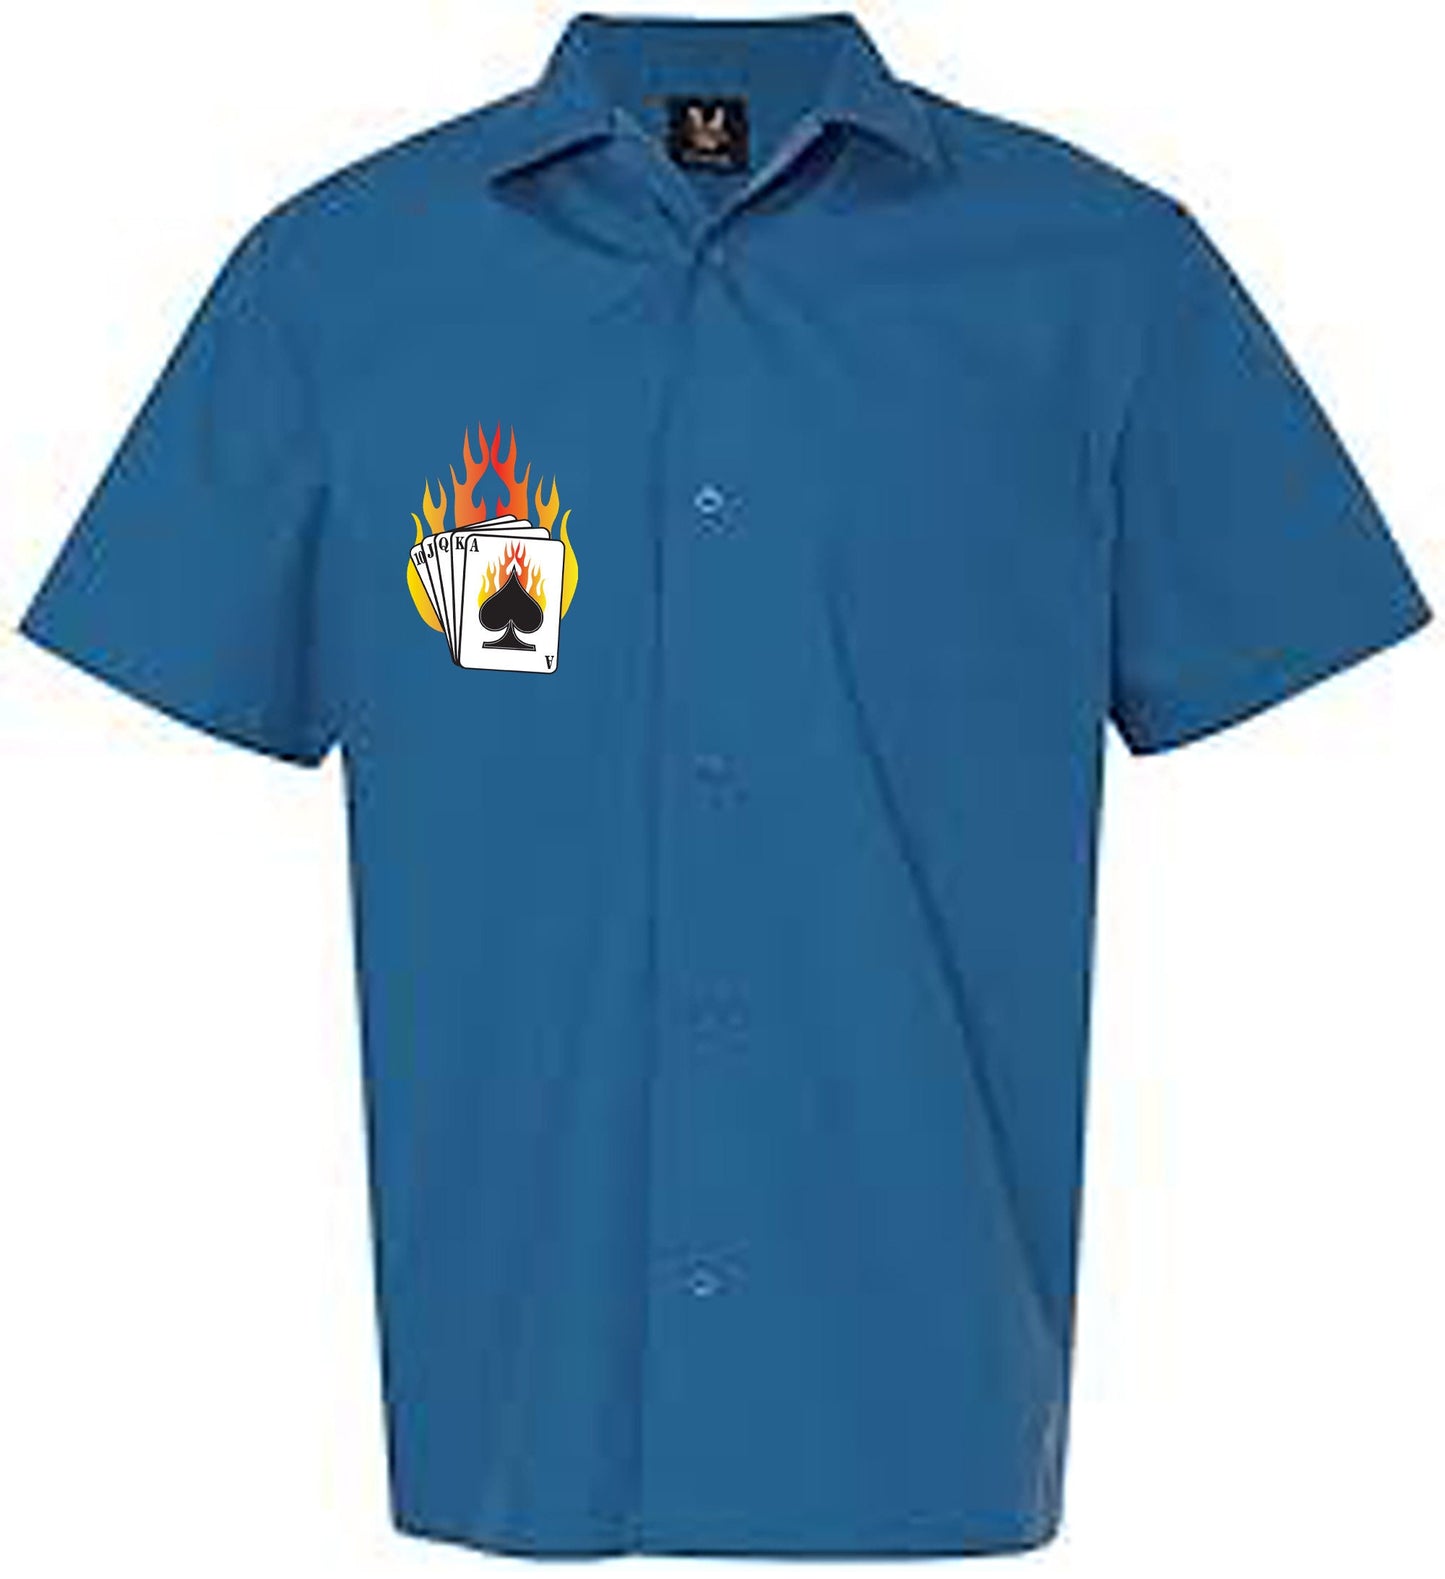 Flaming Cards Classic Retro Bowling Shirt- Vintage Bowler ( Closeout) in multiple colors  - Includes Embroidered Name #233